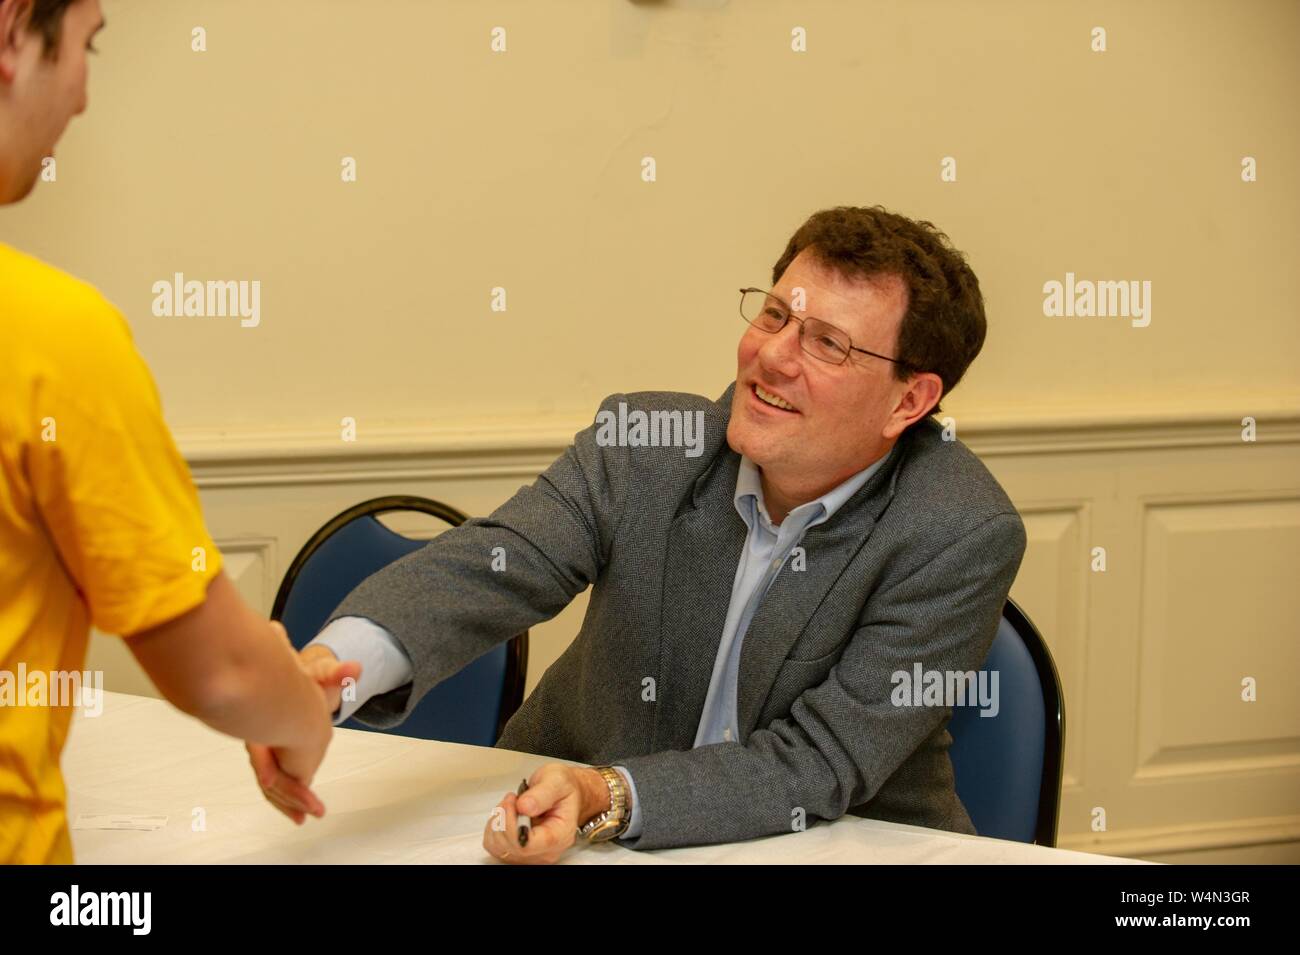 Journalist Nicholas Kristof shakes hands with a student during a Foreign Affairs symposium at the Johns Hopkins University in Baltimore, Maryland, February 2, 2010. From the Homewood Photography collection. () Stock Photo